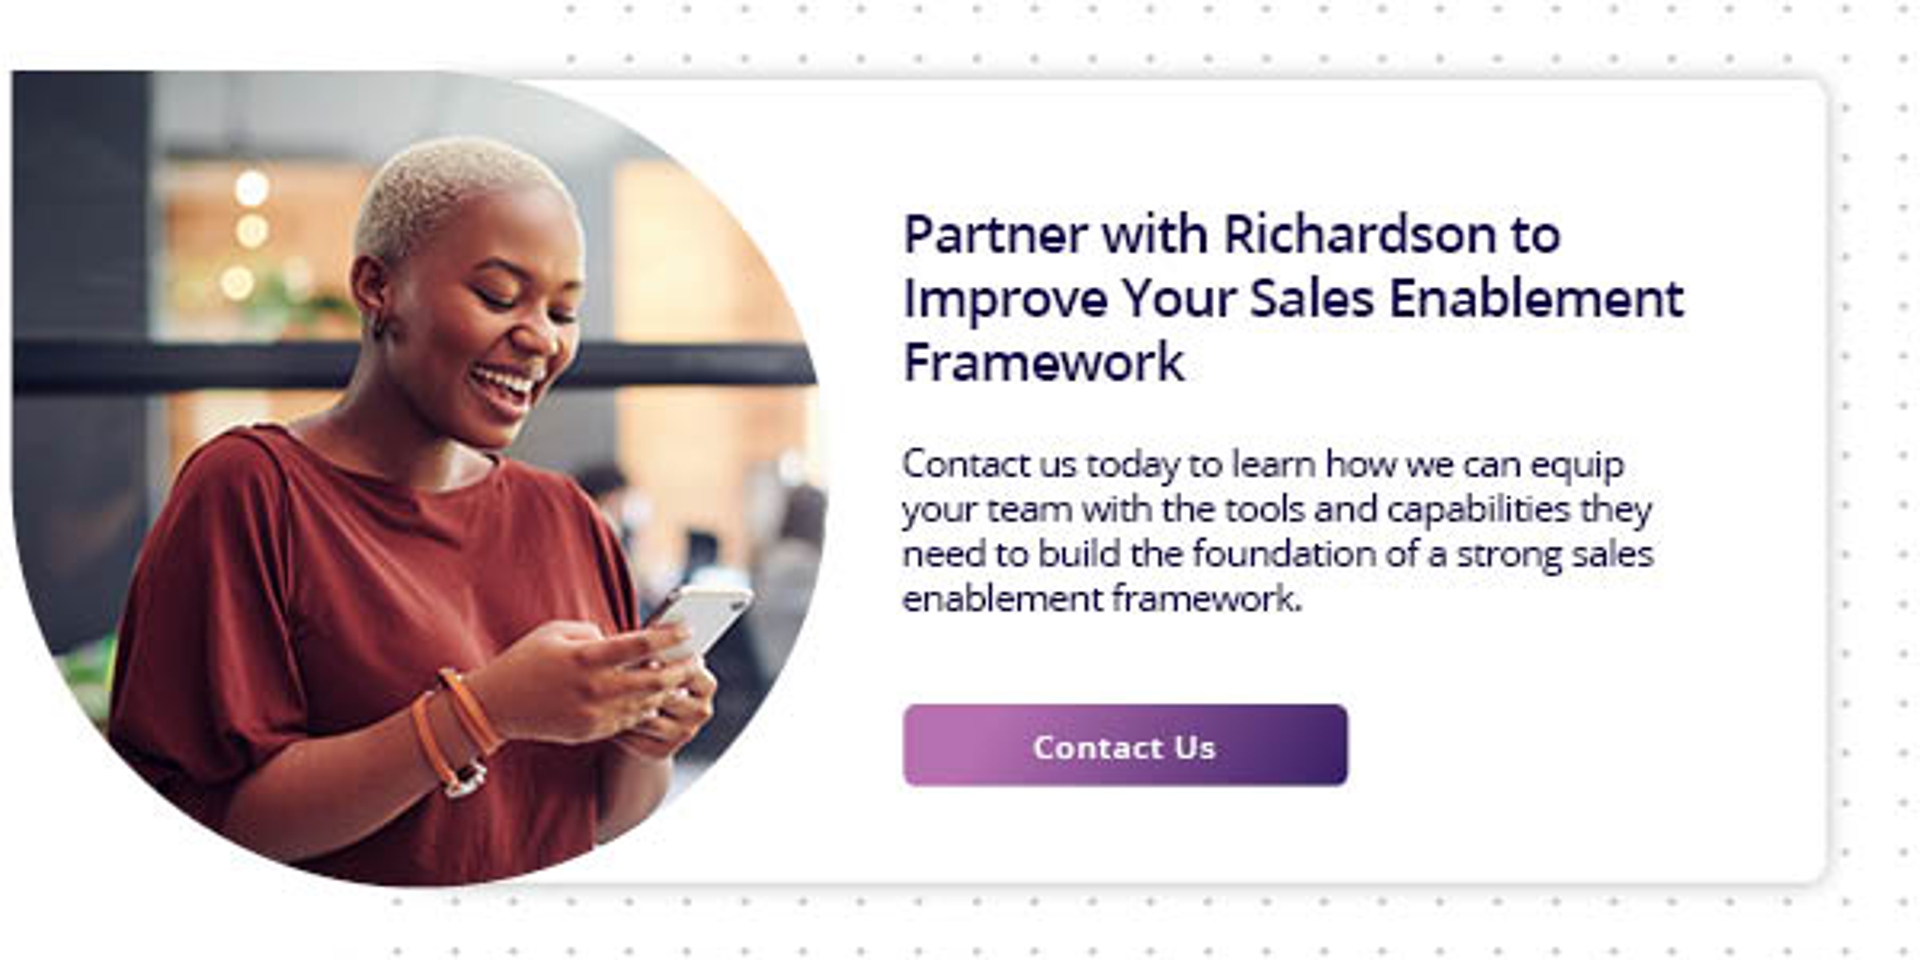 click here to contact richardson to learn how we can help your team build a strong sales enablement framework